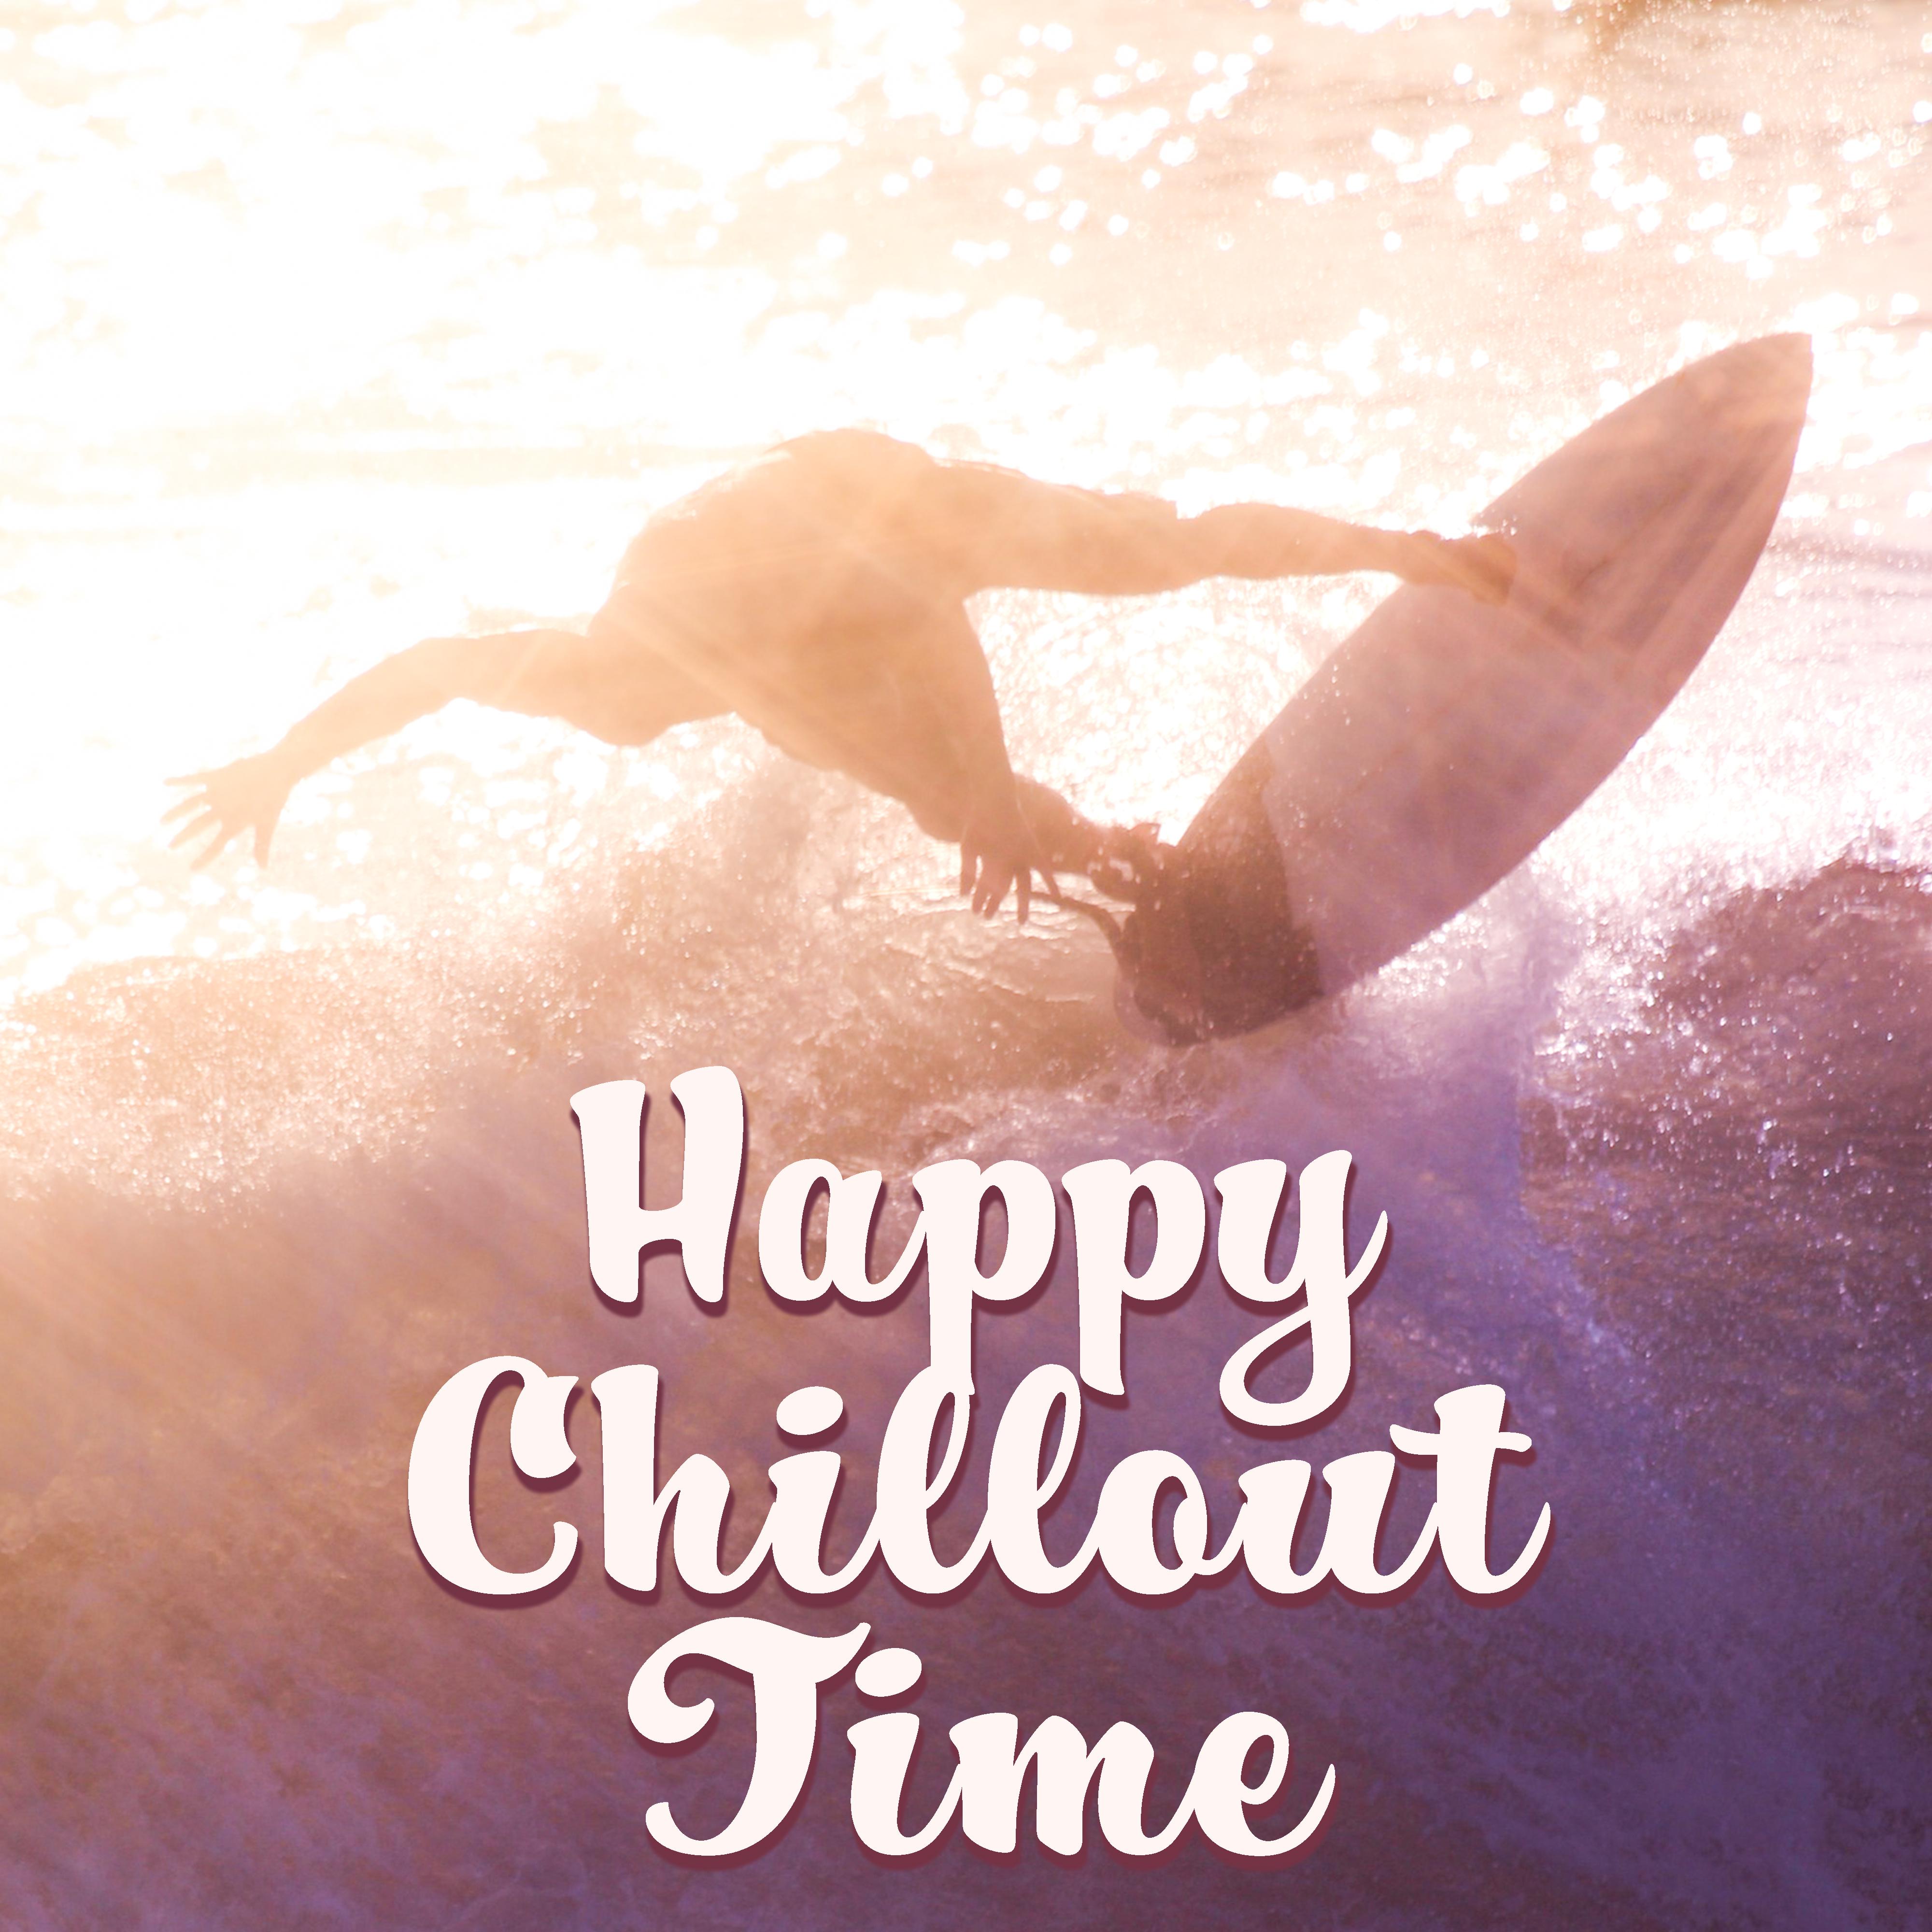 Happy Chillout Time – Relax & Chill, Summer Music, Chillout 2017, Vacation